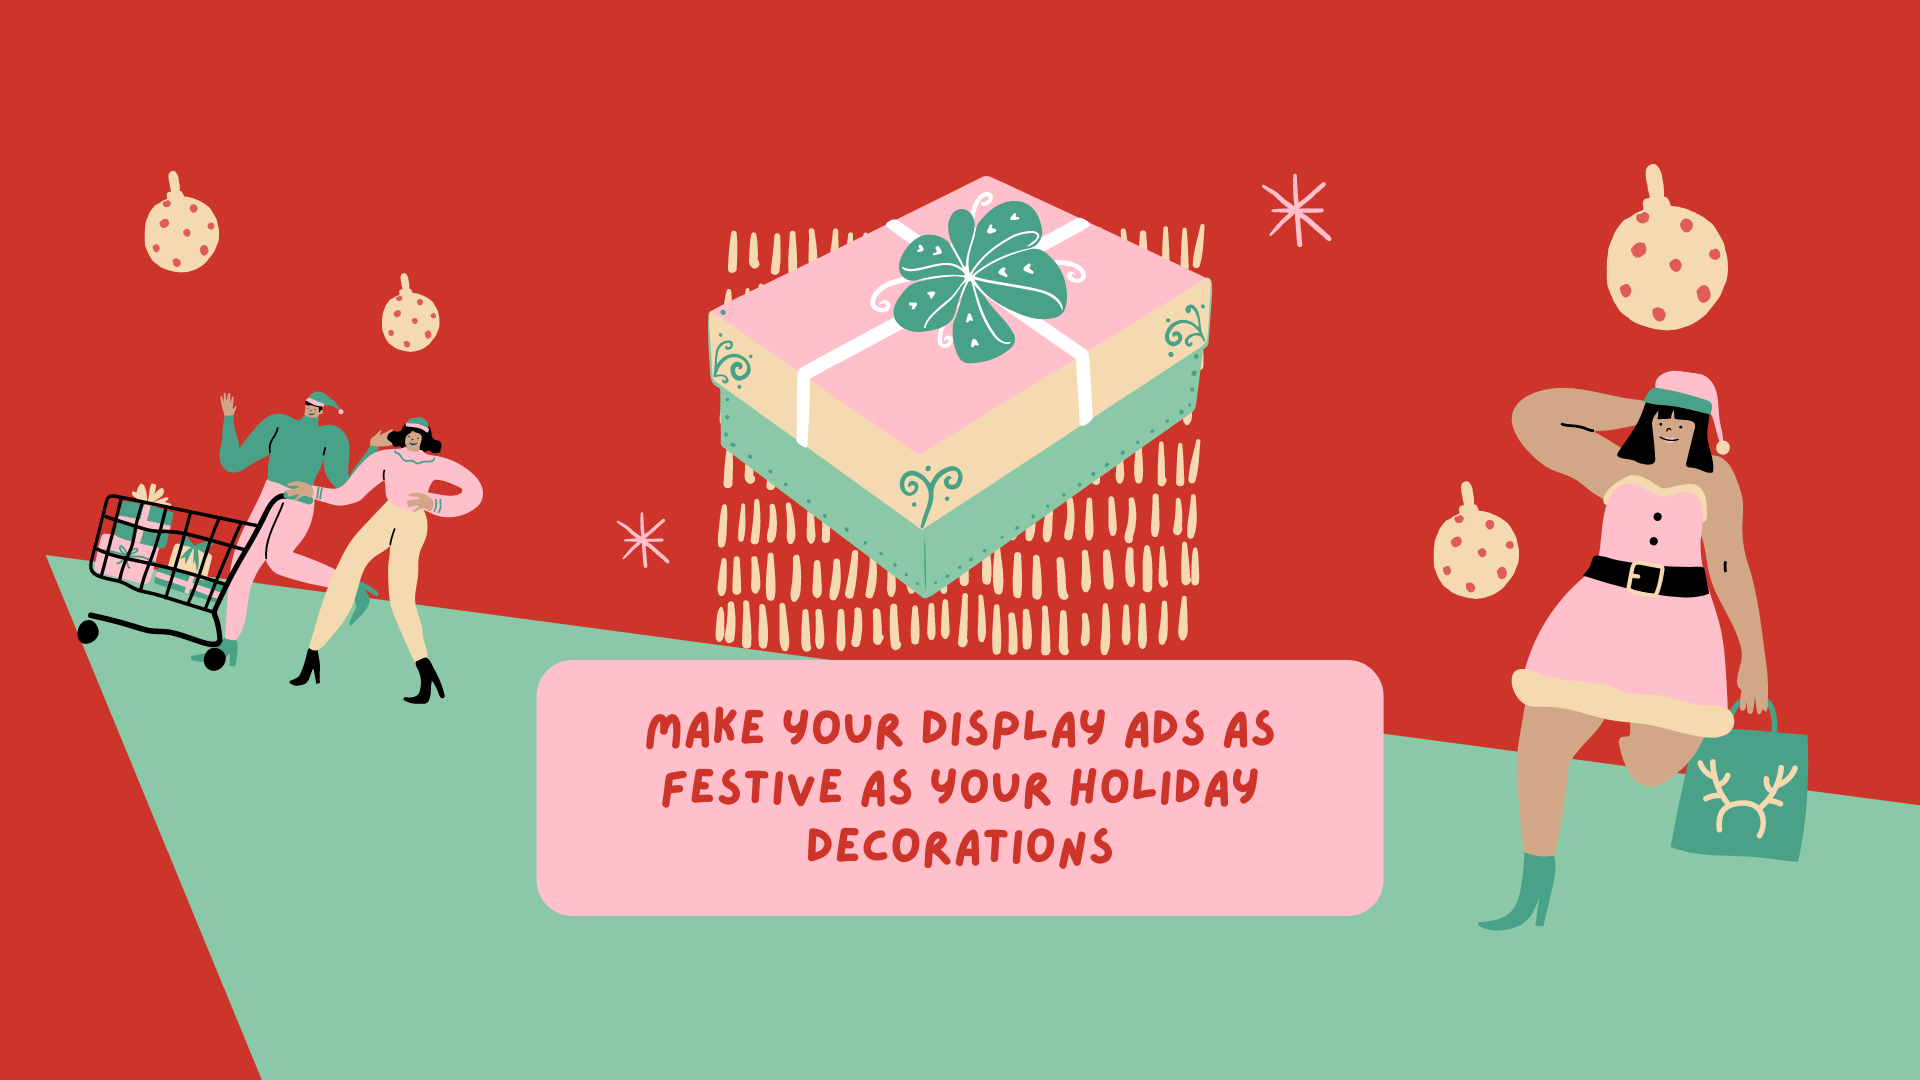 Make your display ads as festive as your holiday decorations